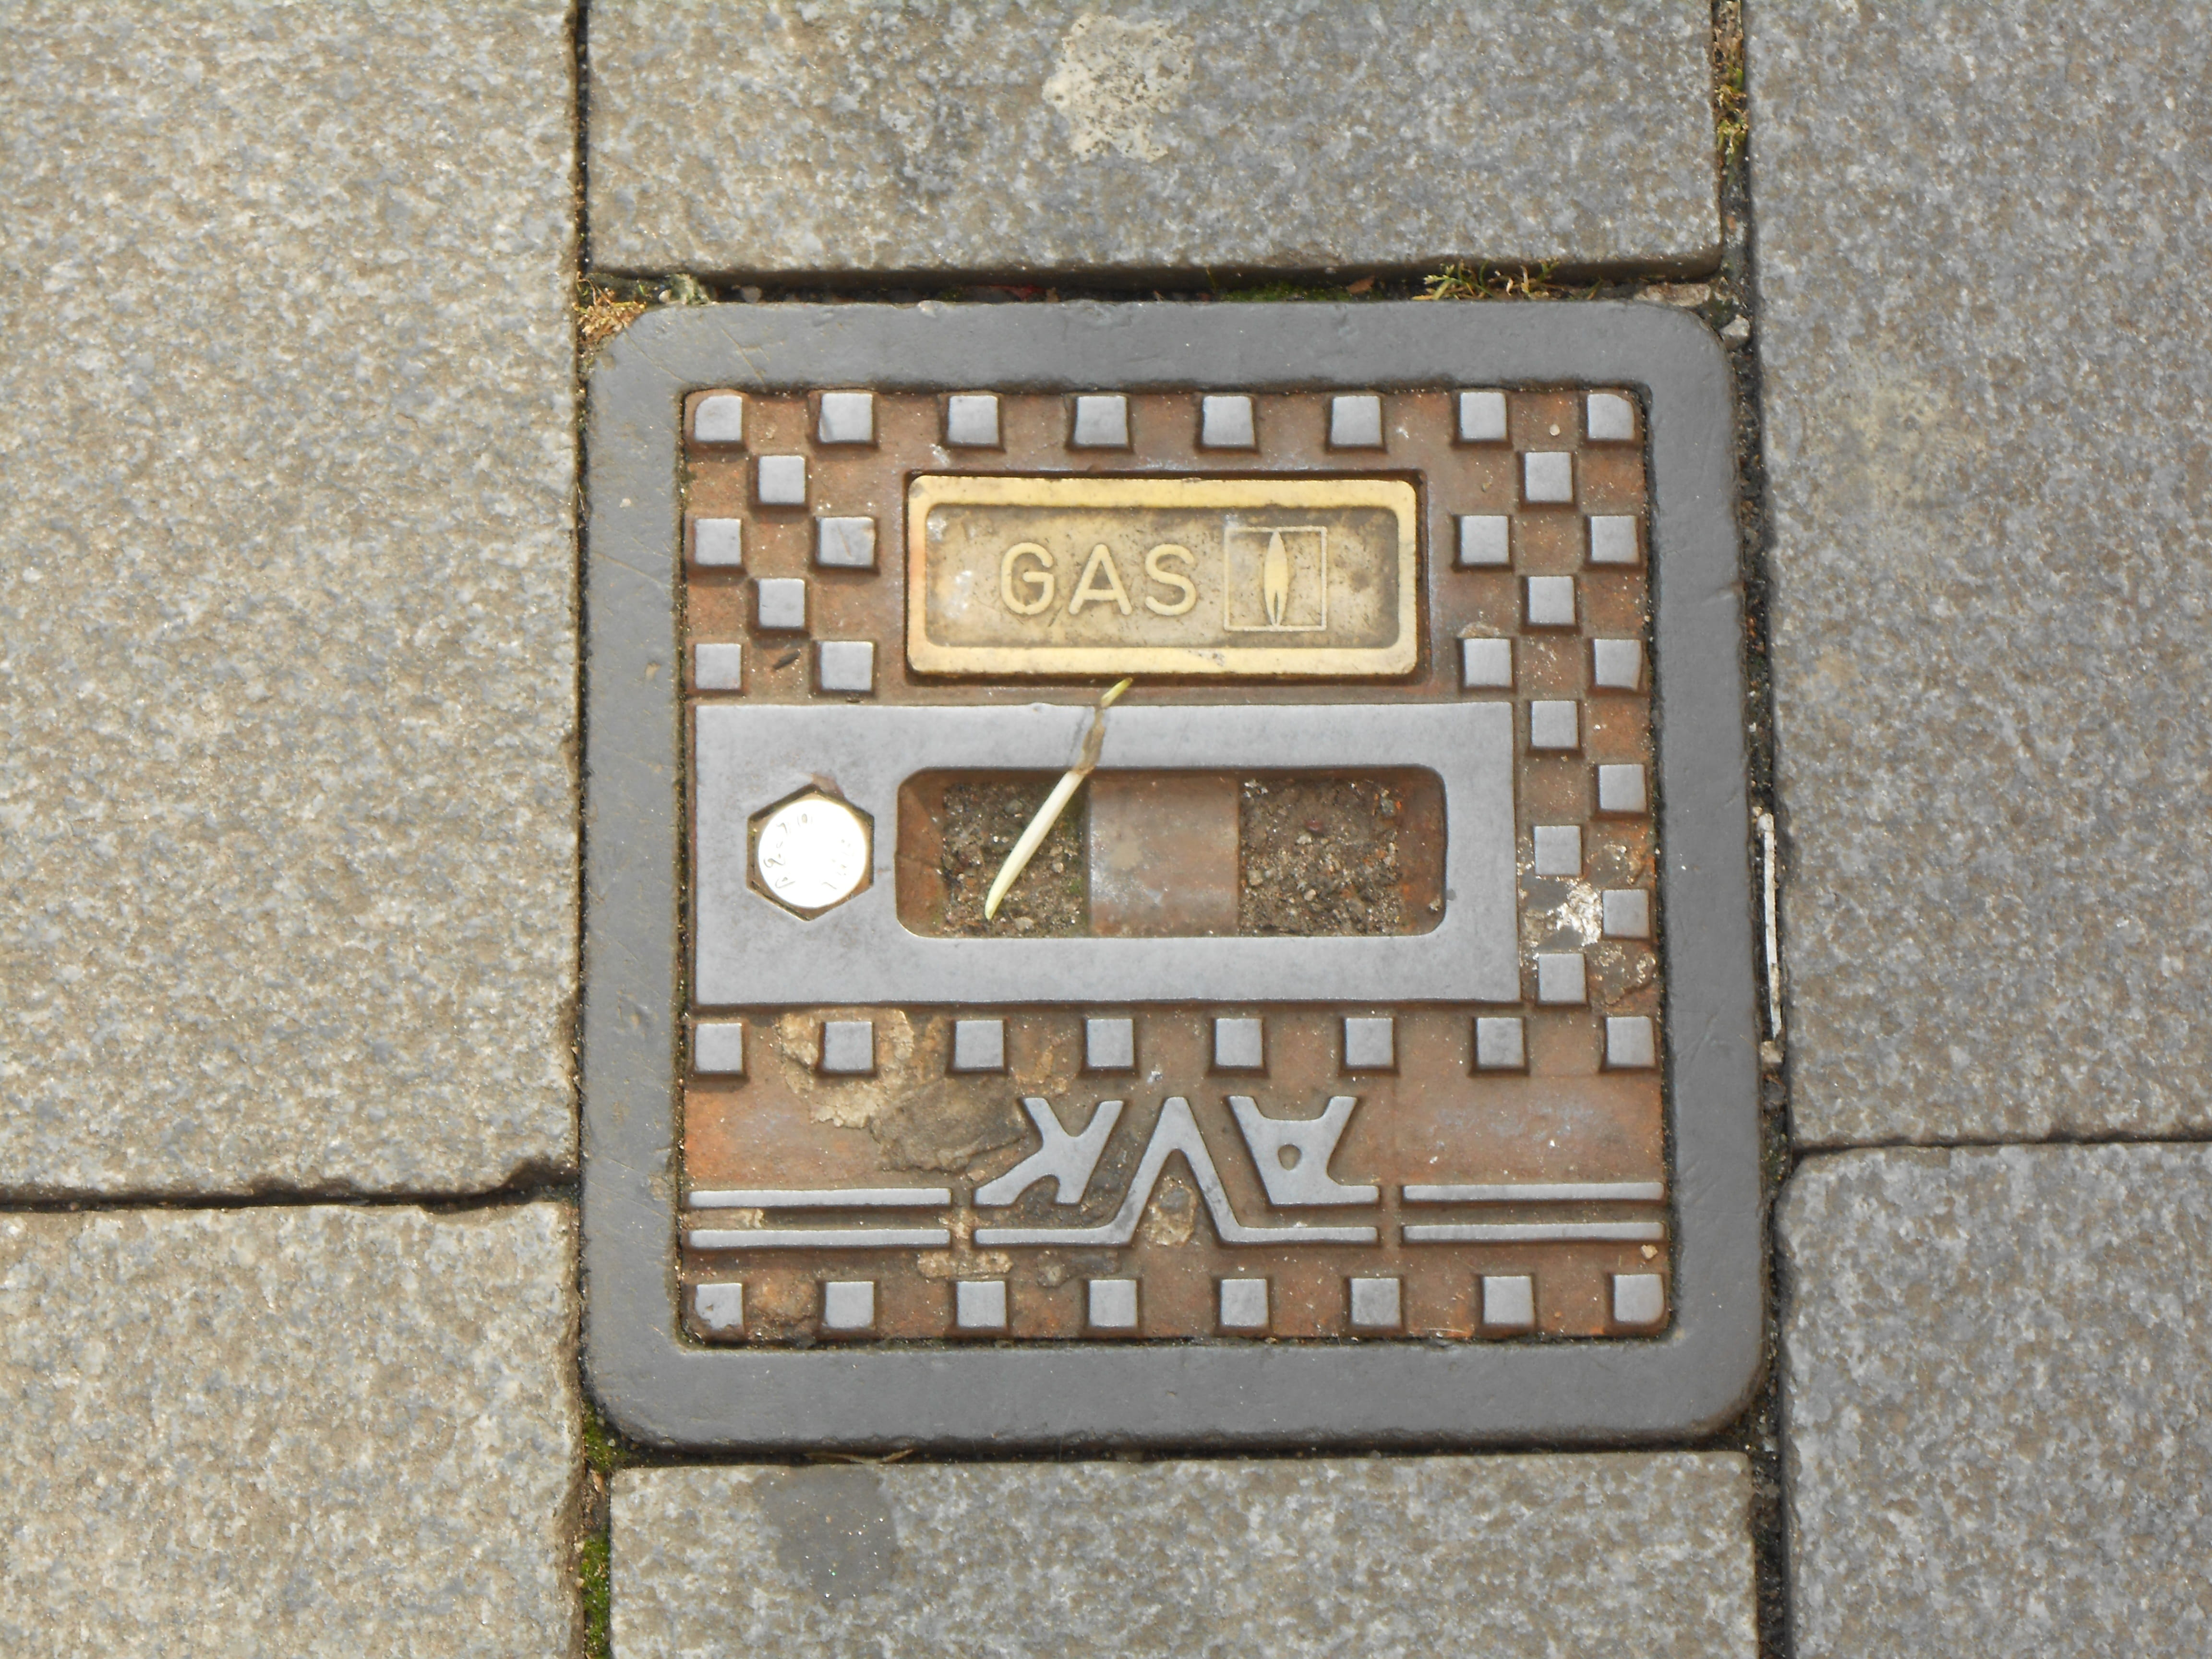 Sewer, Manhole Cover, Grates, sewer grates, no people, close-up